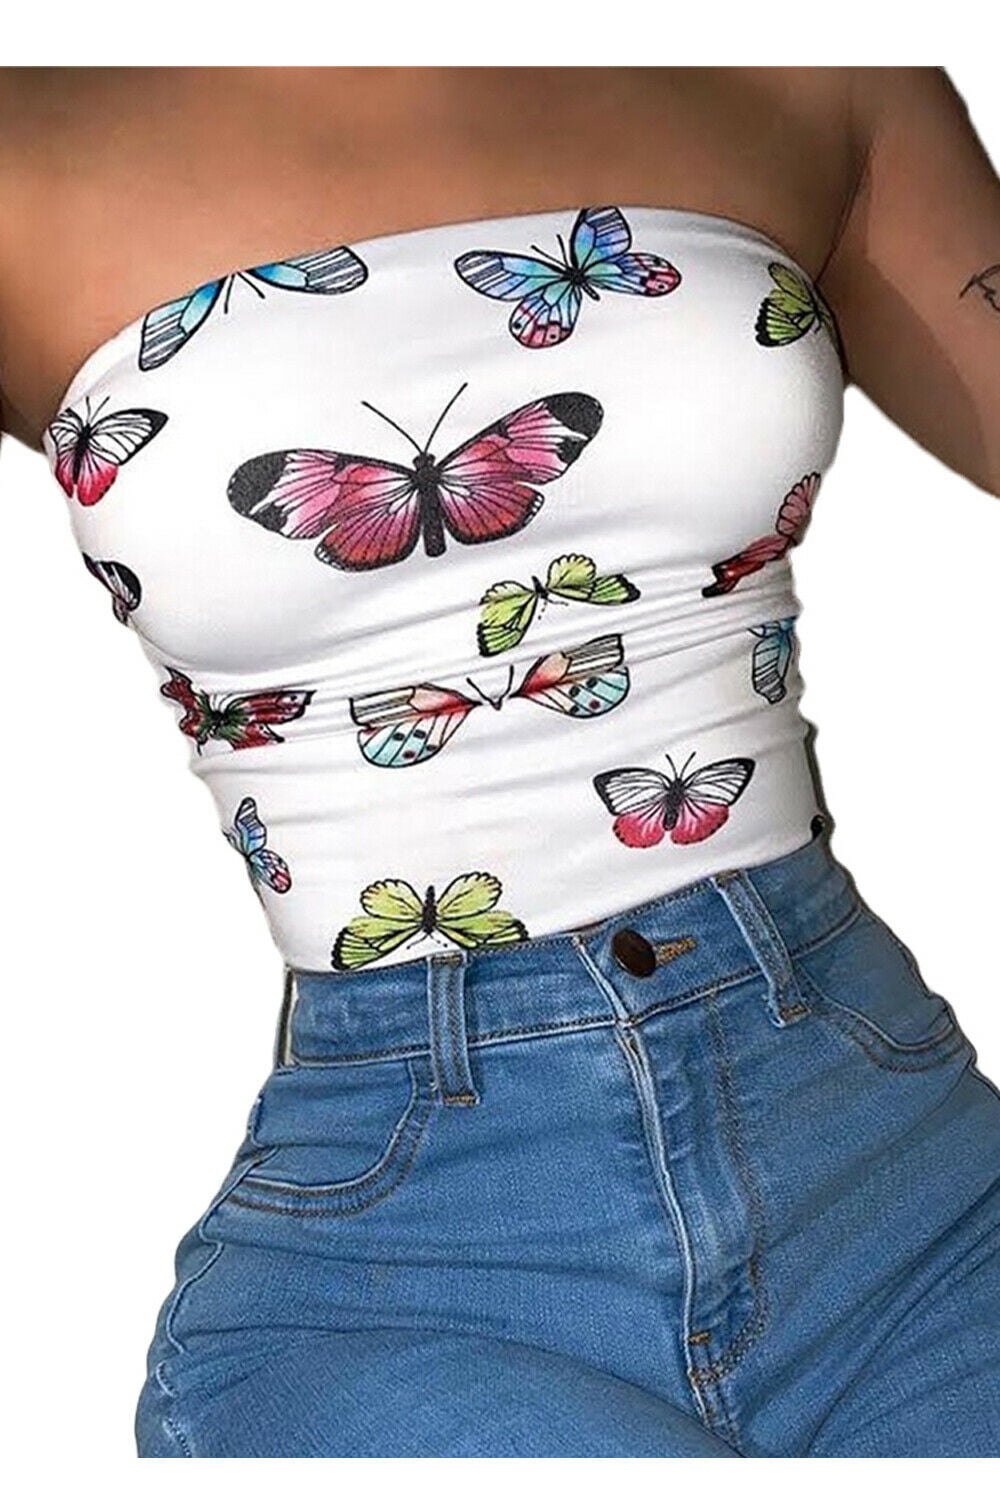 Womens Plus Size Grey Floral Butterfly Printed Boob Tube Sheering Mini Tops 